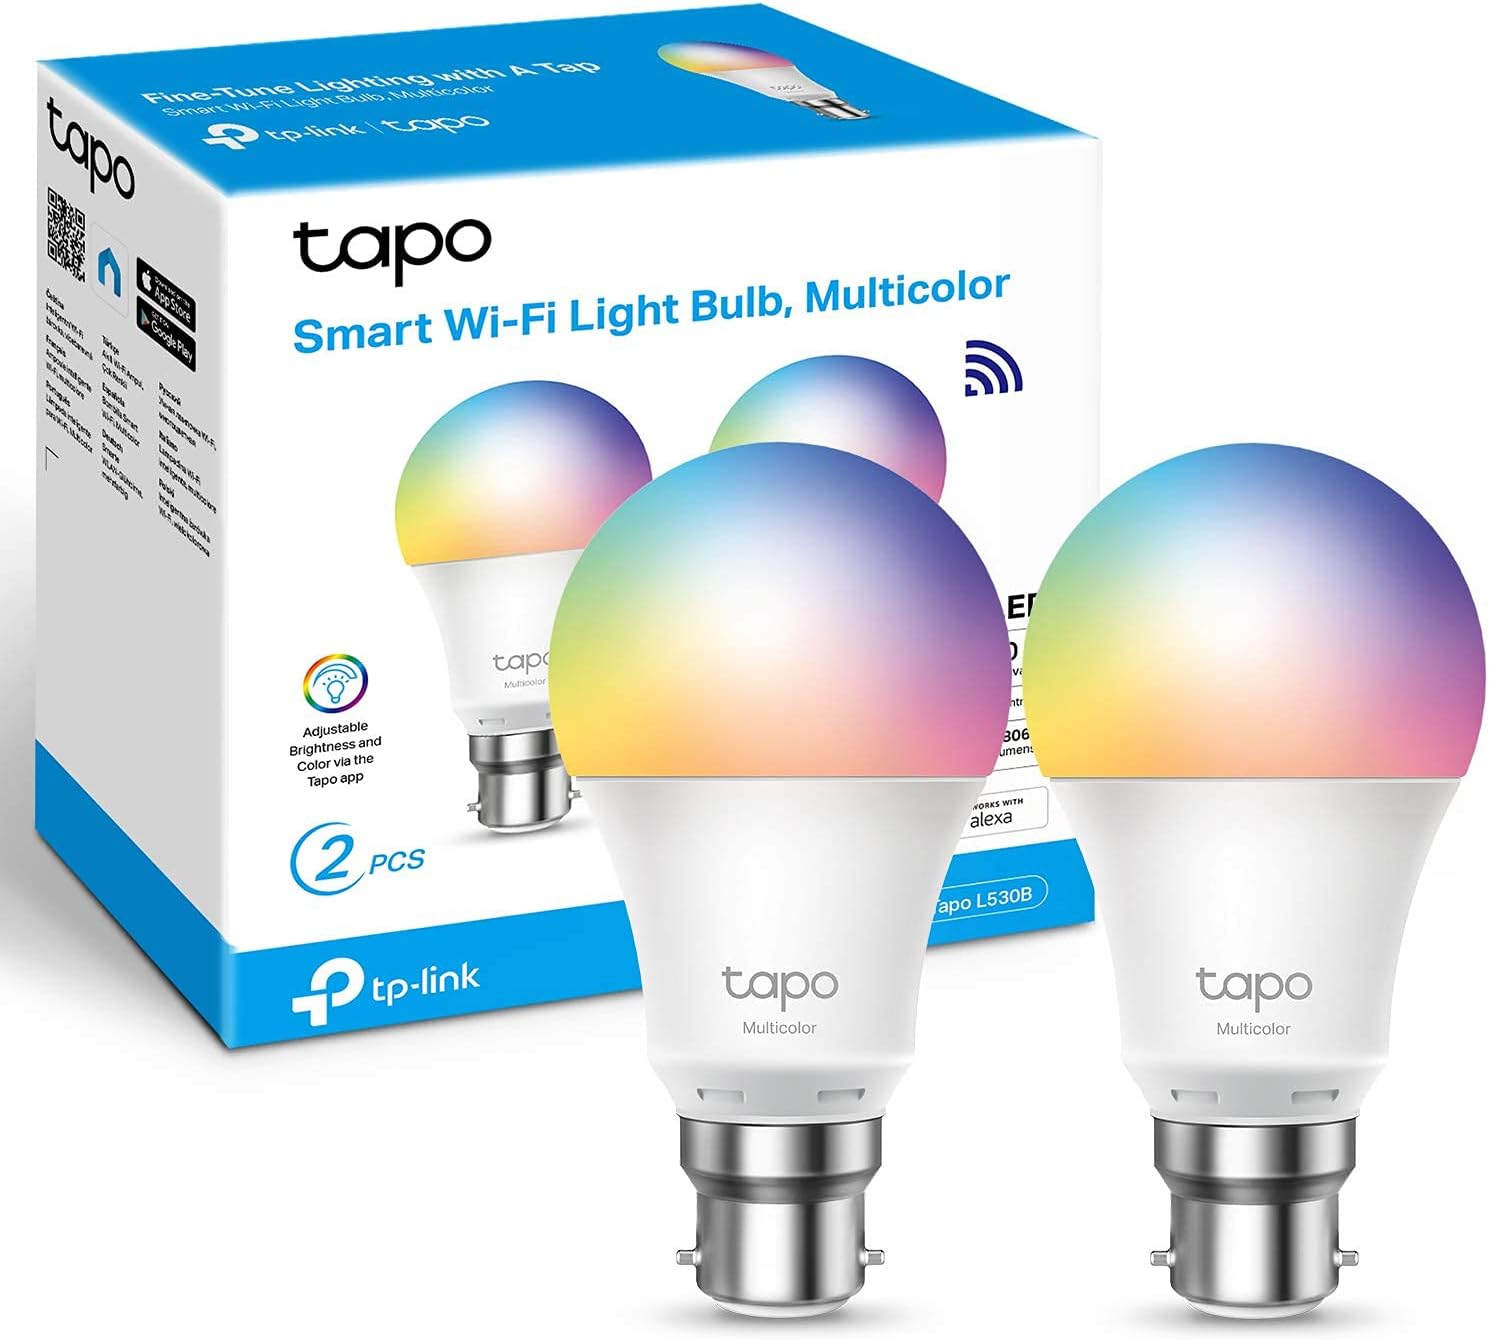 Save 33% on multicolour smart bulbs with this Tapo two-pack